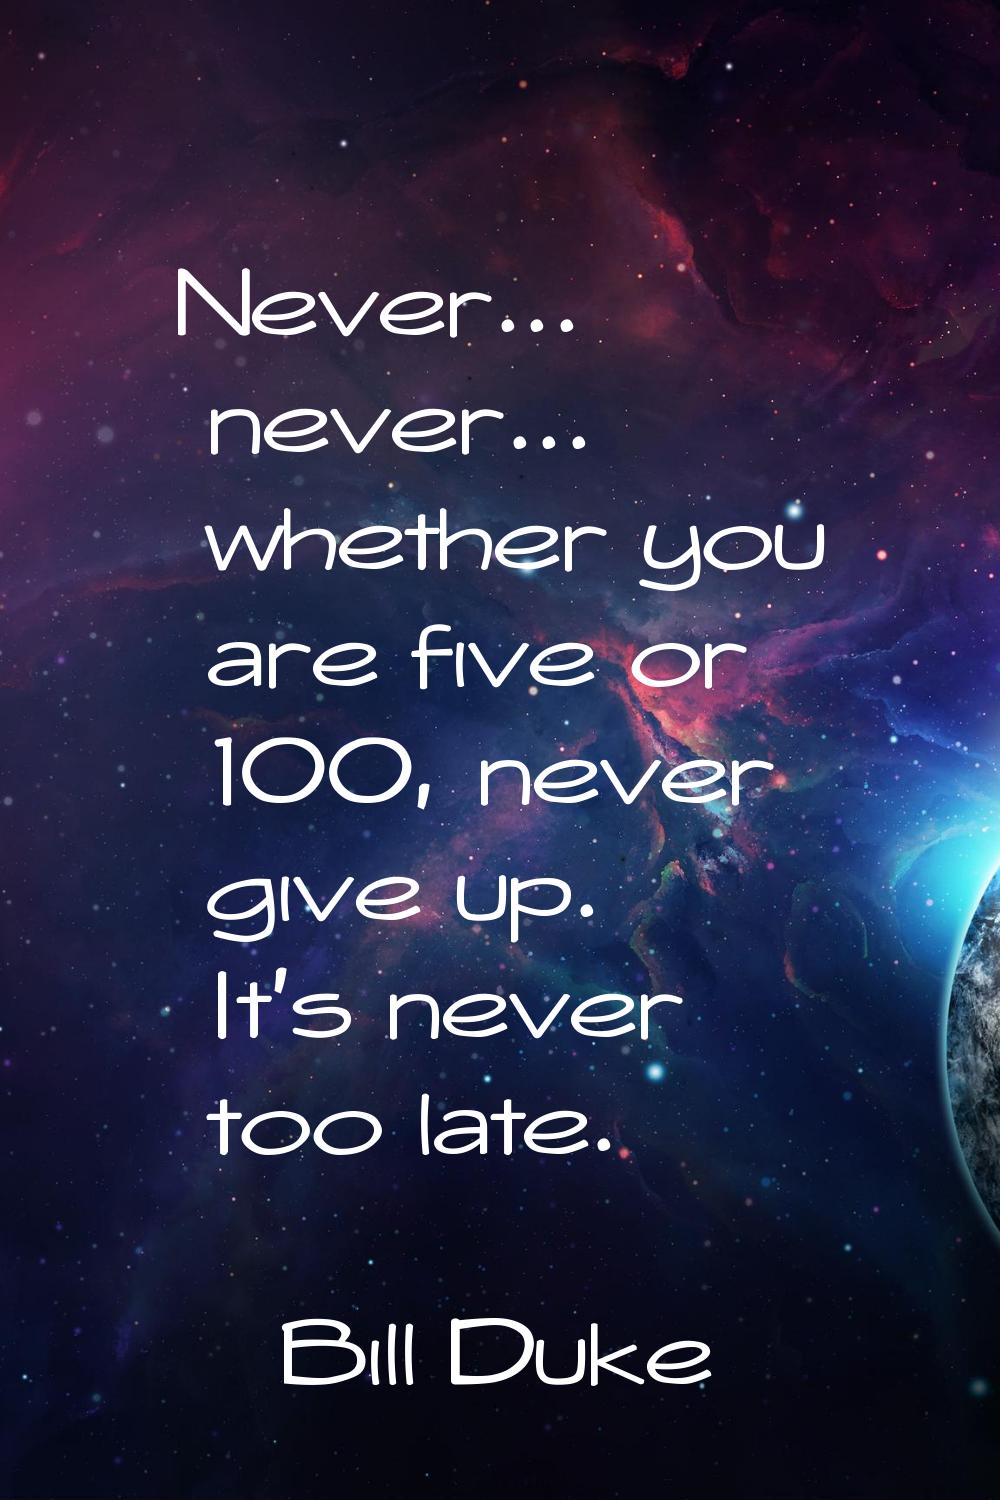 Never... never... whether you are five or 100, never give up. It's never too late.